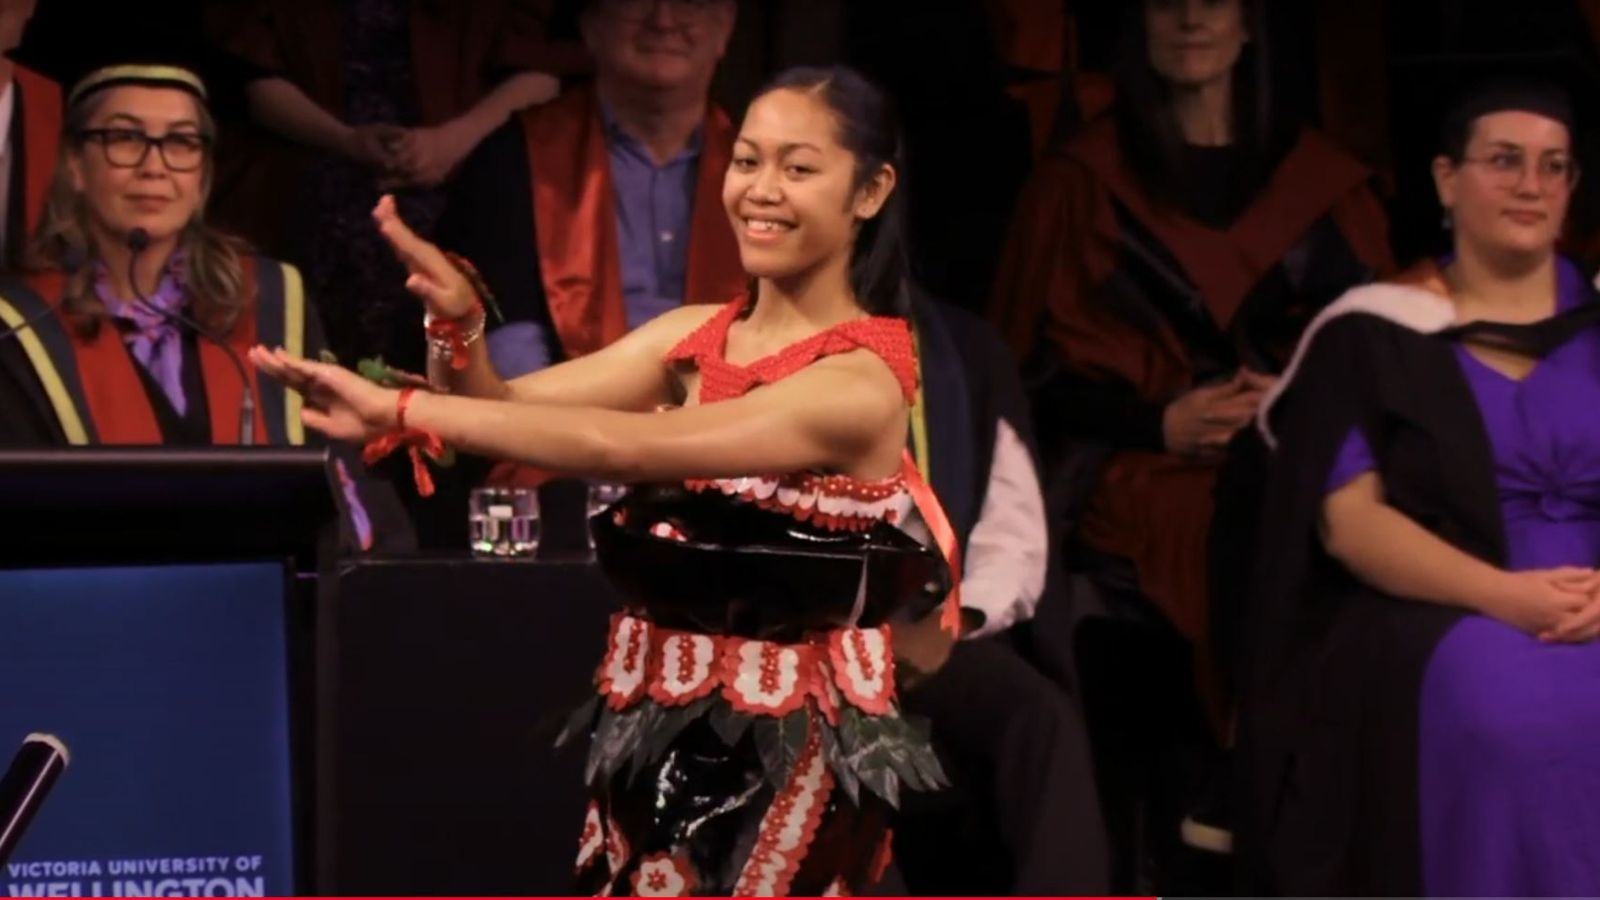 A women performing a dance on the stage.